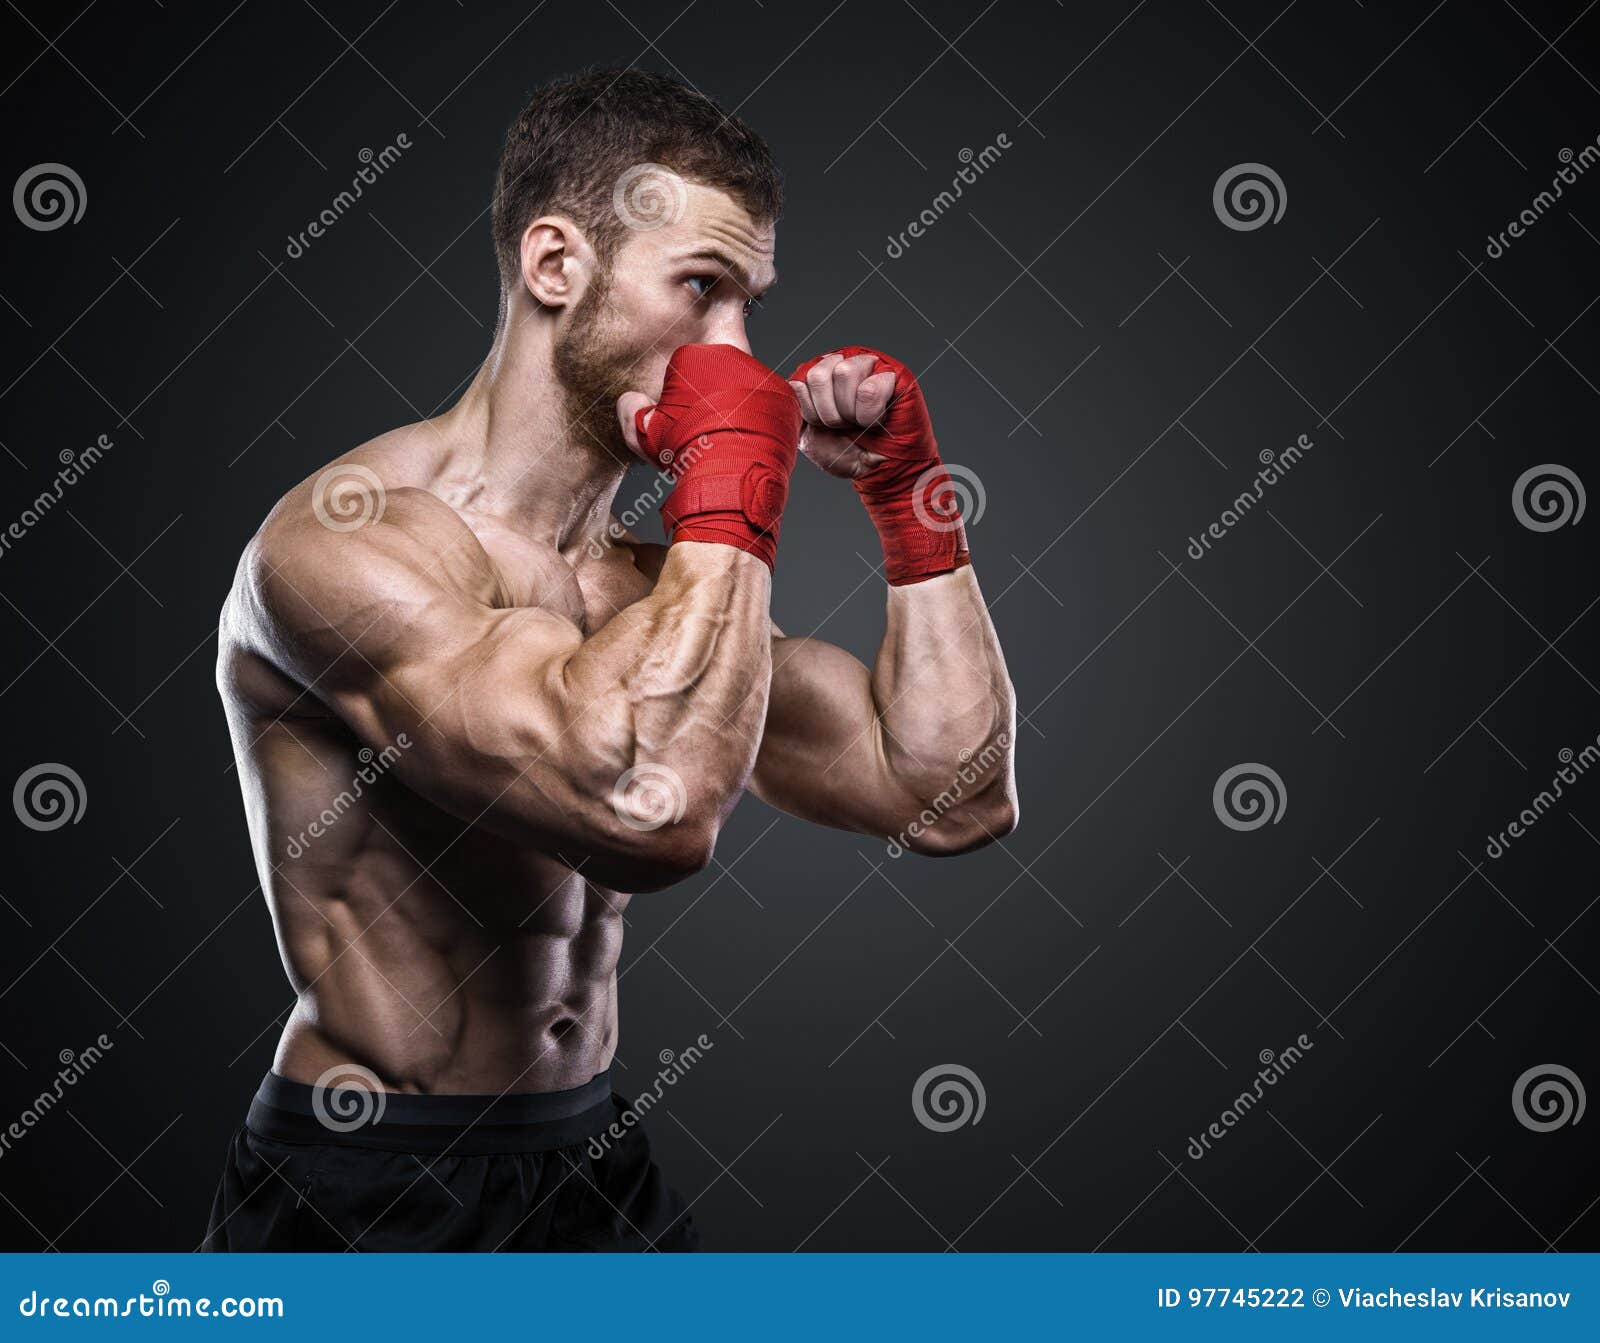 mma fighter preparing bandages for training.